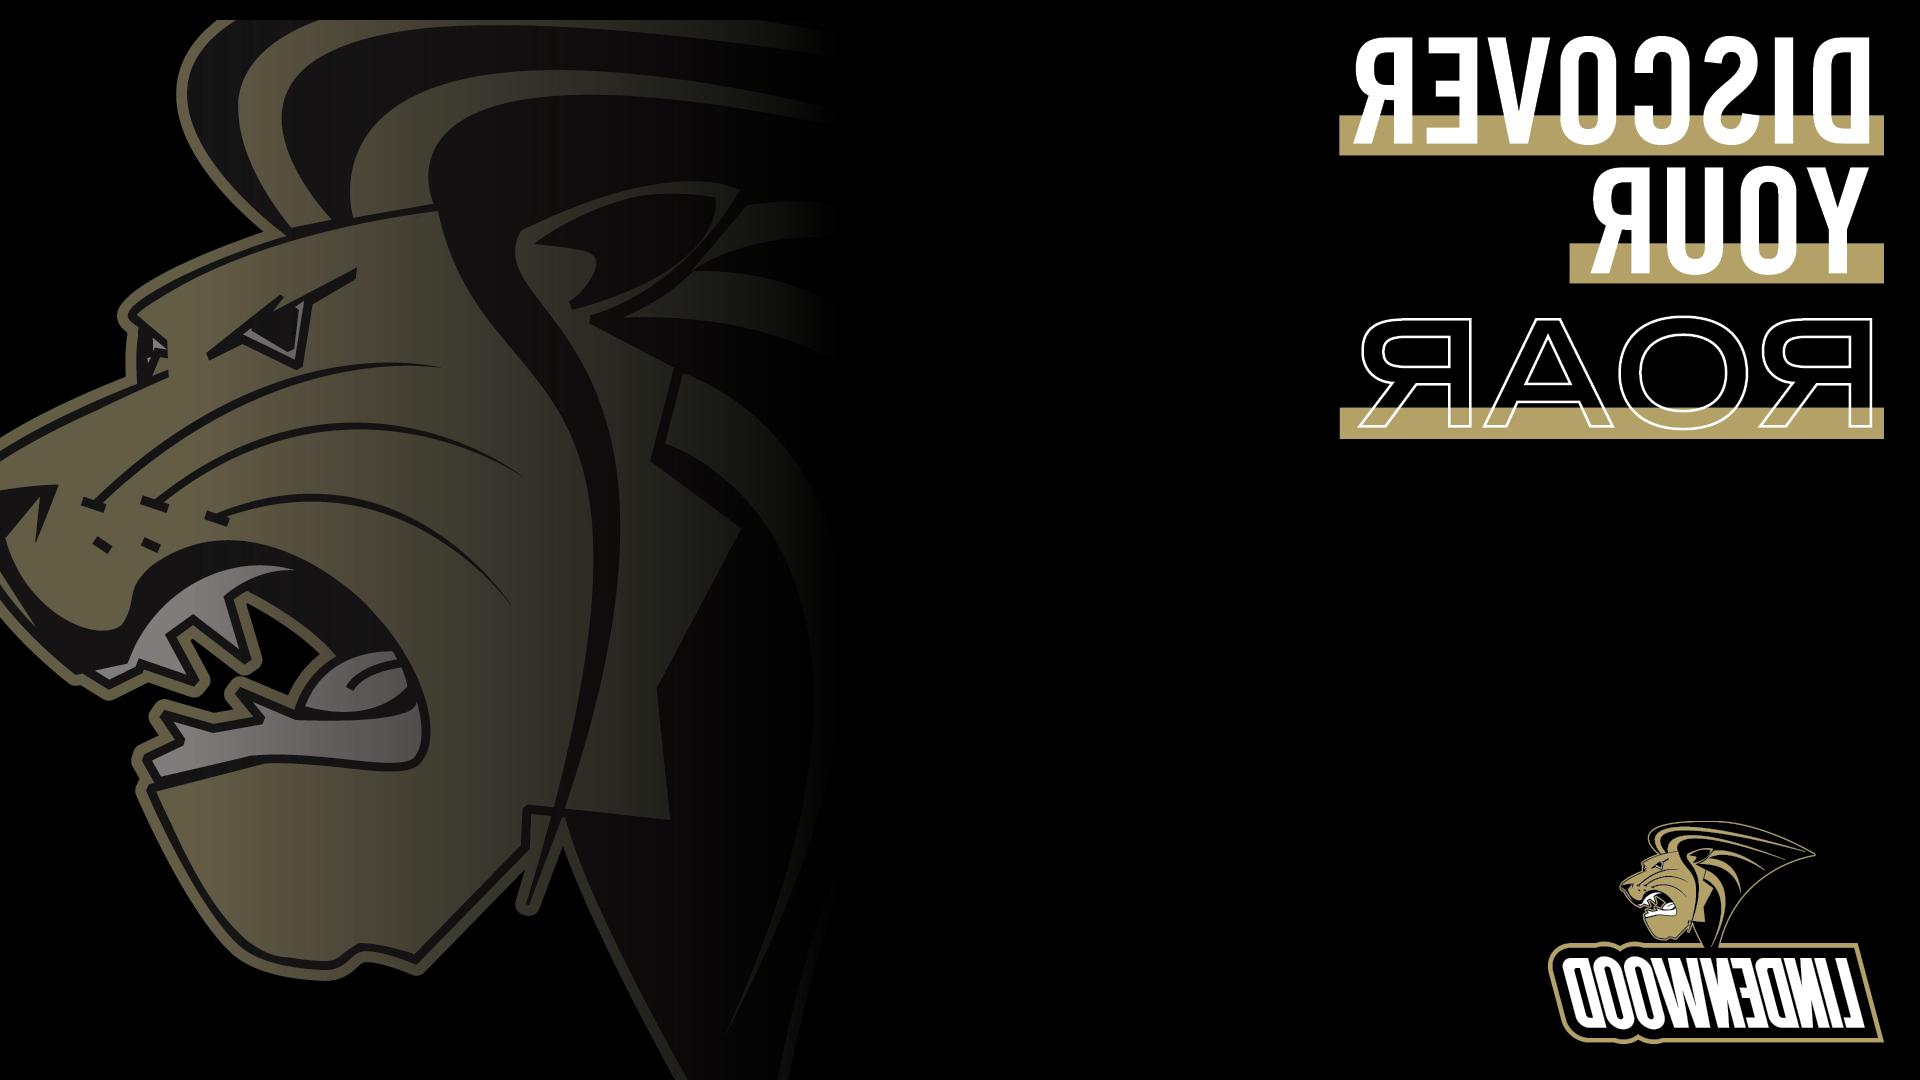 The athletics logo, a stylized lion head, with a black gradient fading the image. The Phrase discover your roar in the top left corner